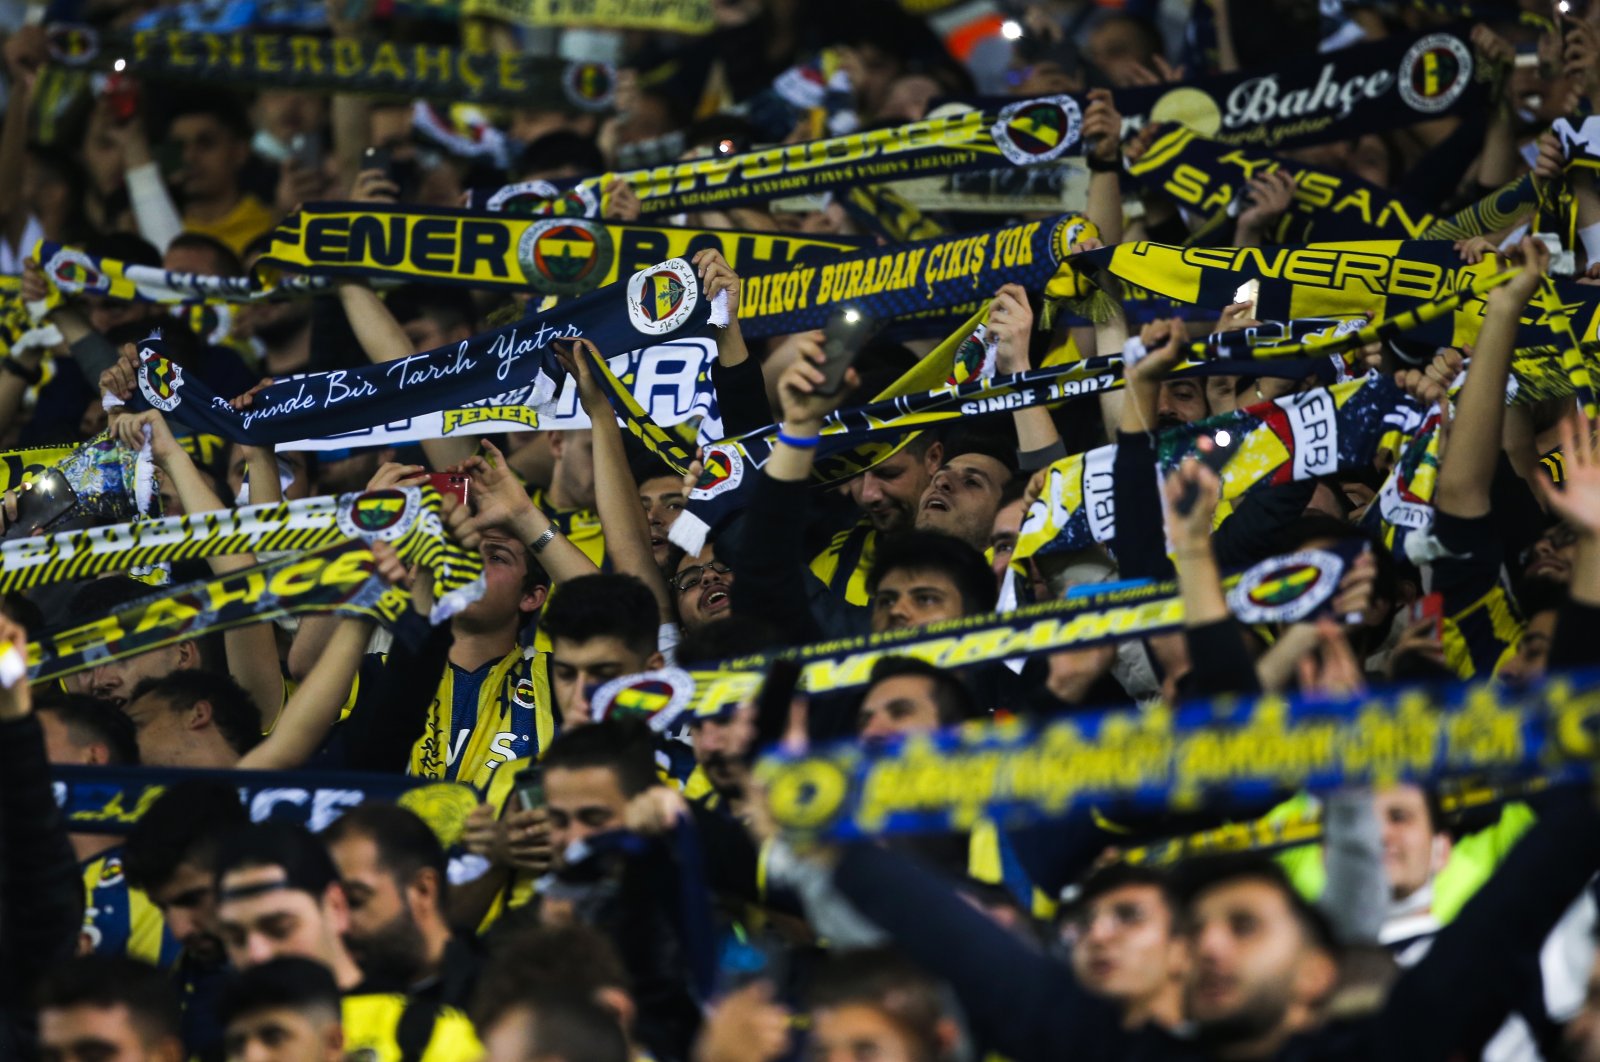 Fenerbahçe fans cheer prior to the Europa League group D soccer match between Fenerbahçe and Antwerp at the Sukru Saracoglu stadium in Istanbul, Turkey, Oct. 21, 2021. (AP File Photo)